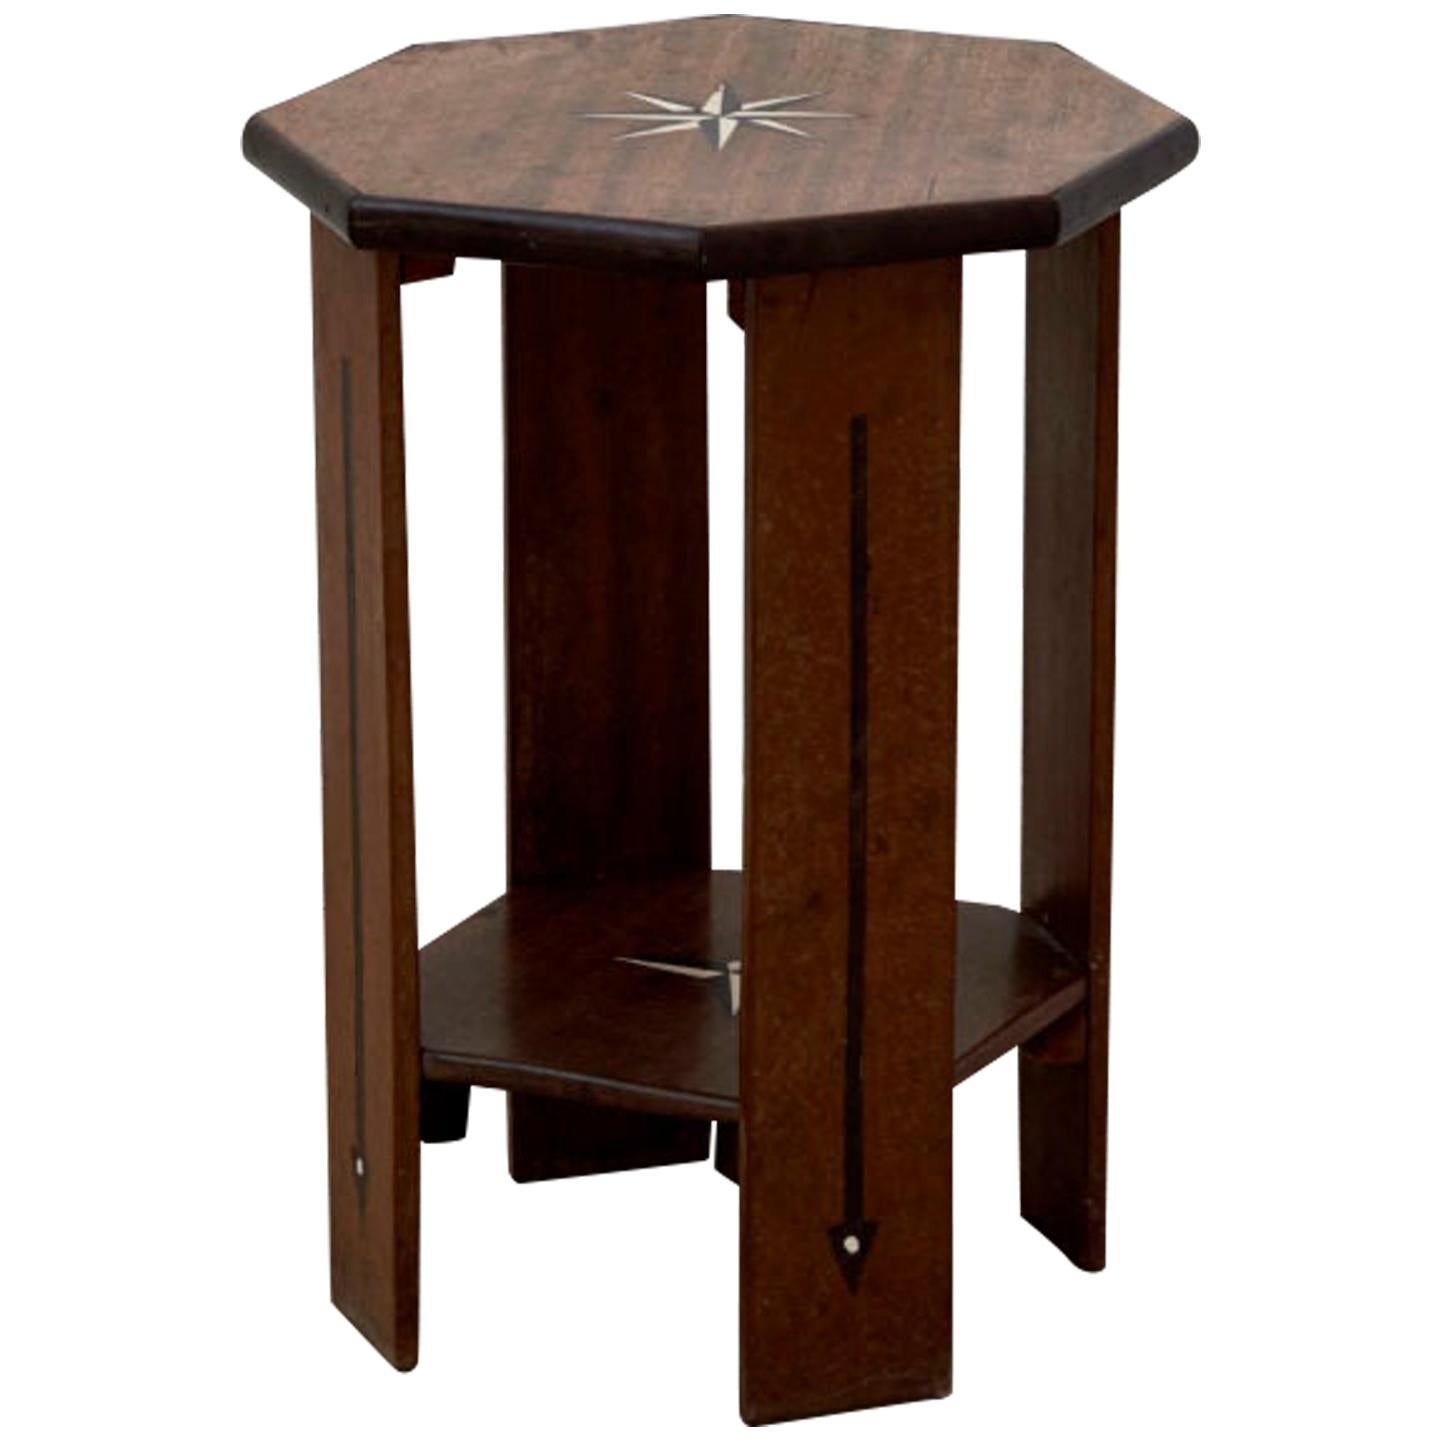 Vintage English 1930s Small Octagonal Side Table in Teak with Ebony and Bone 